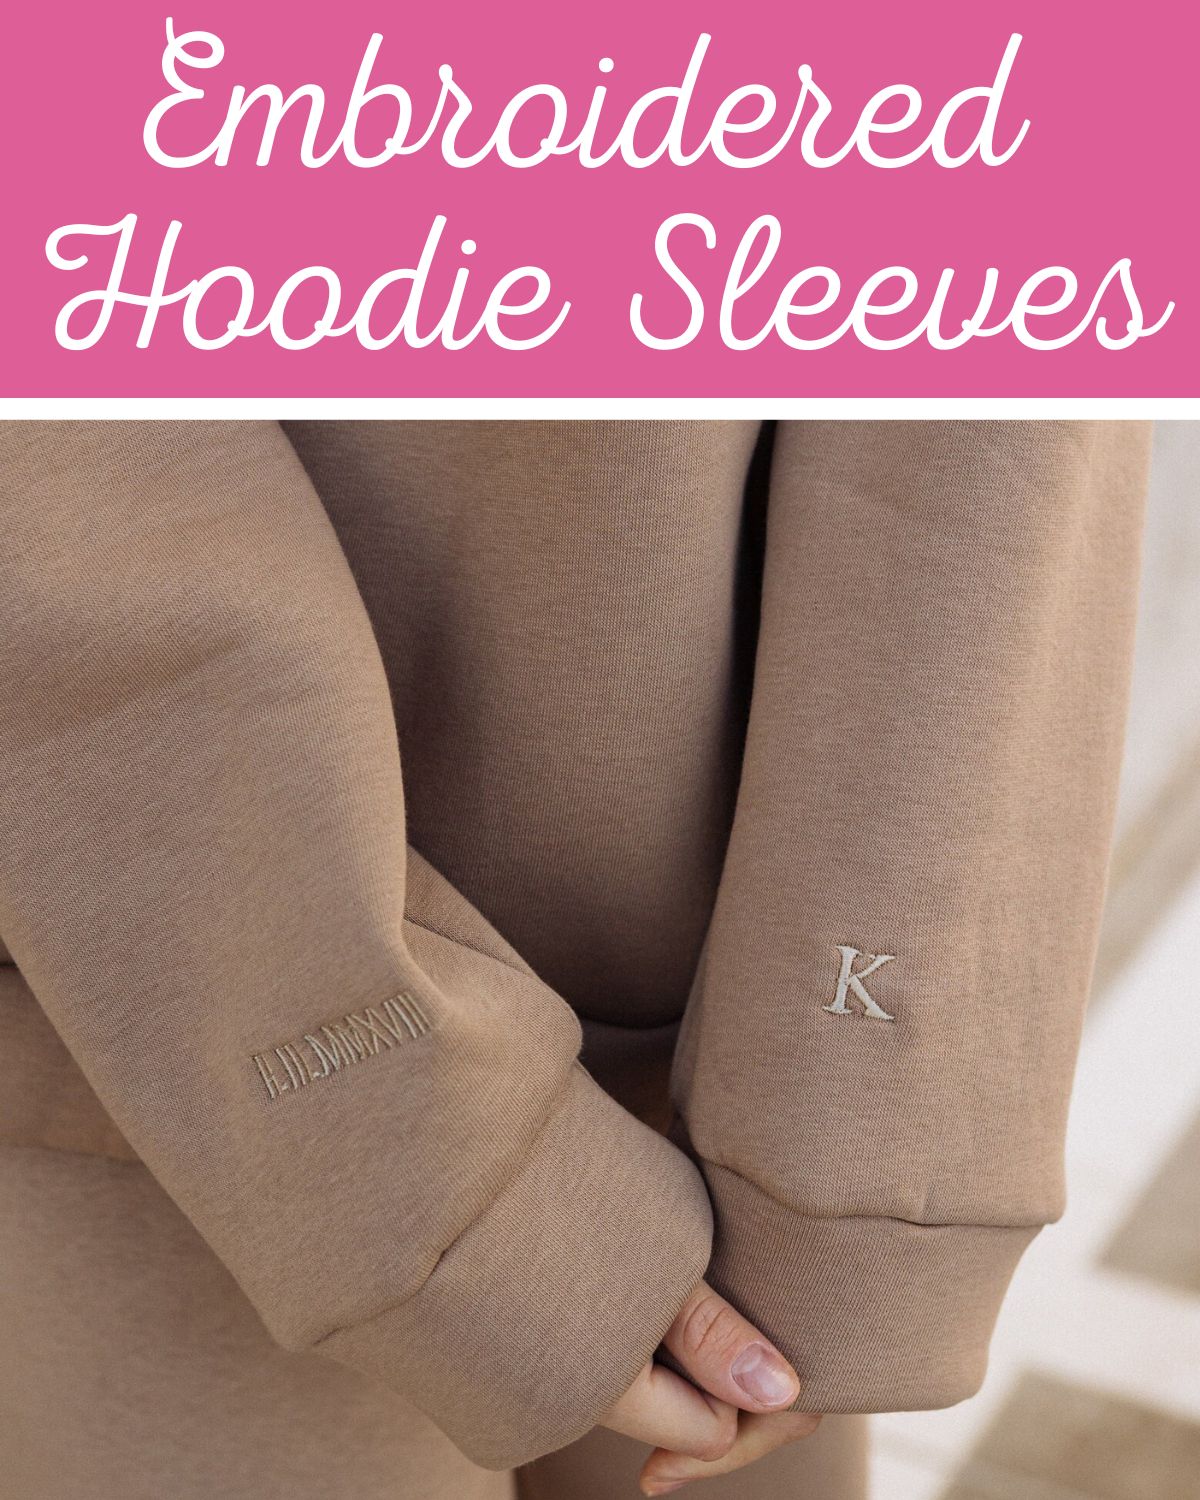 Hoodie sleeves with little embroidered details